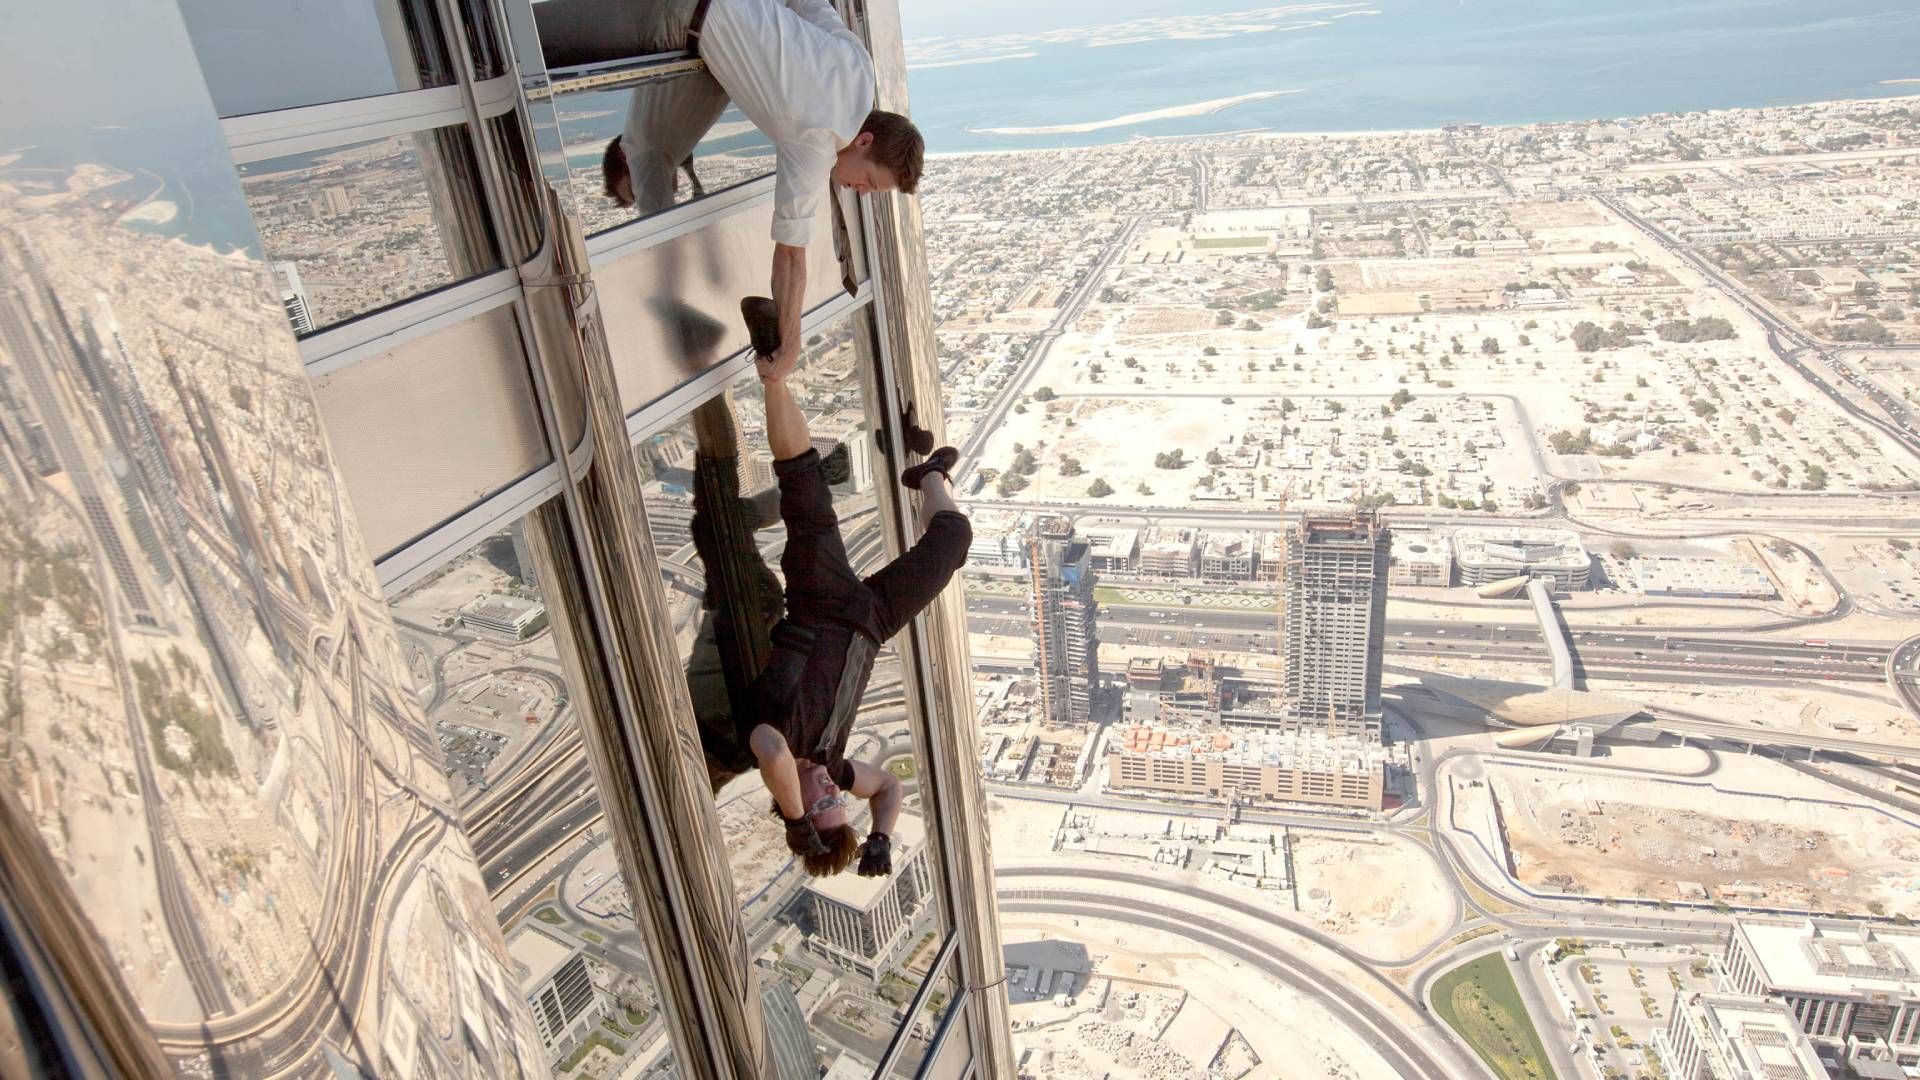 <p>                     Tom Cruise doesn’t do anything by half, and the Burj Khalifa scene in Mission: Impossible – Ghost Protocol is a great example of that. The stunt, which sees Ethan Hunt scaling the skyscraper in pursuit of Cobalt, saw Cruise really climb the tallest building in the world. All done with just a harness and no stunt double, the actor did it all himself, from running along the outside of the building to jumping between sections while helicopters filmed around him. The crew only broke 35 windows during the shoot too, which is nothing short of miraculous.                   </p>